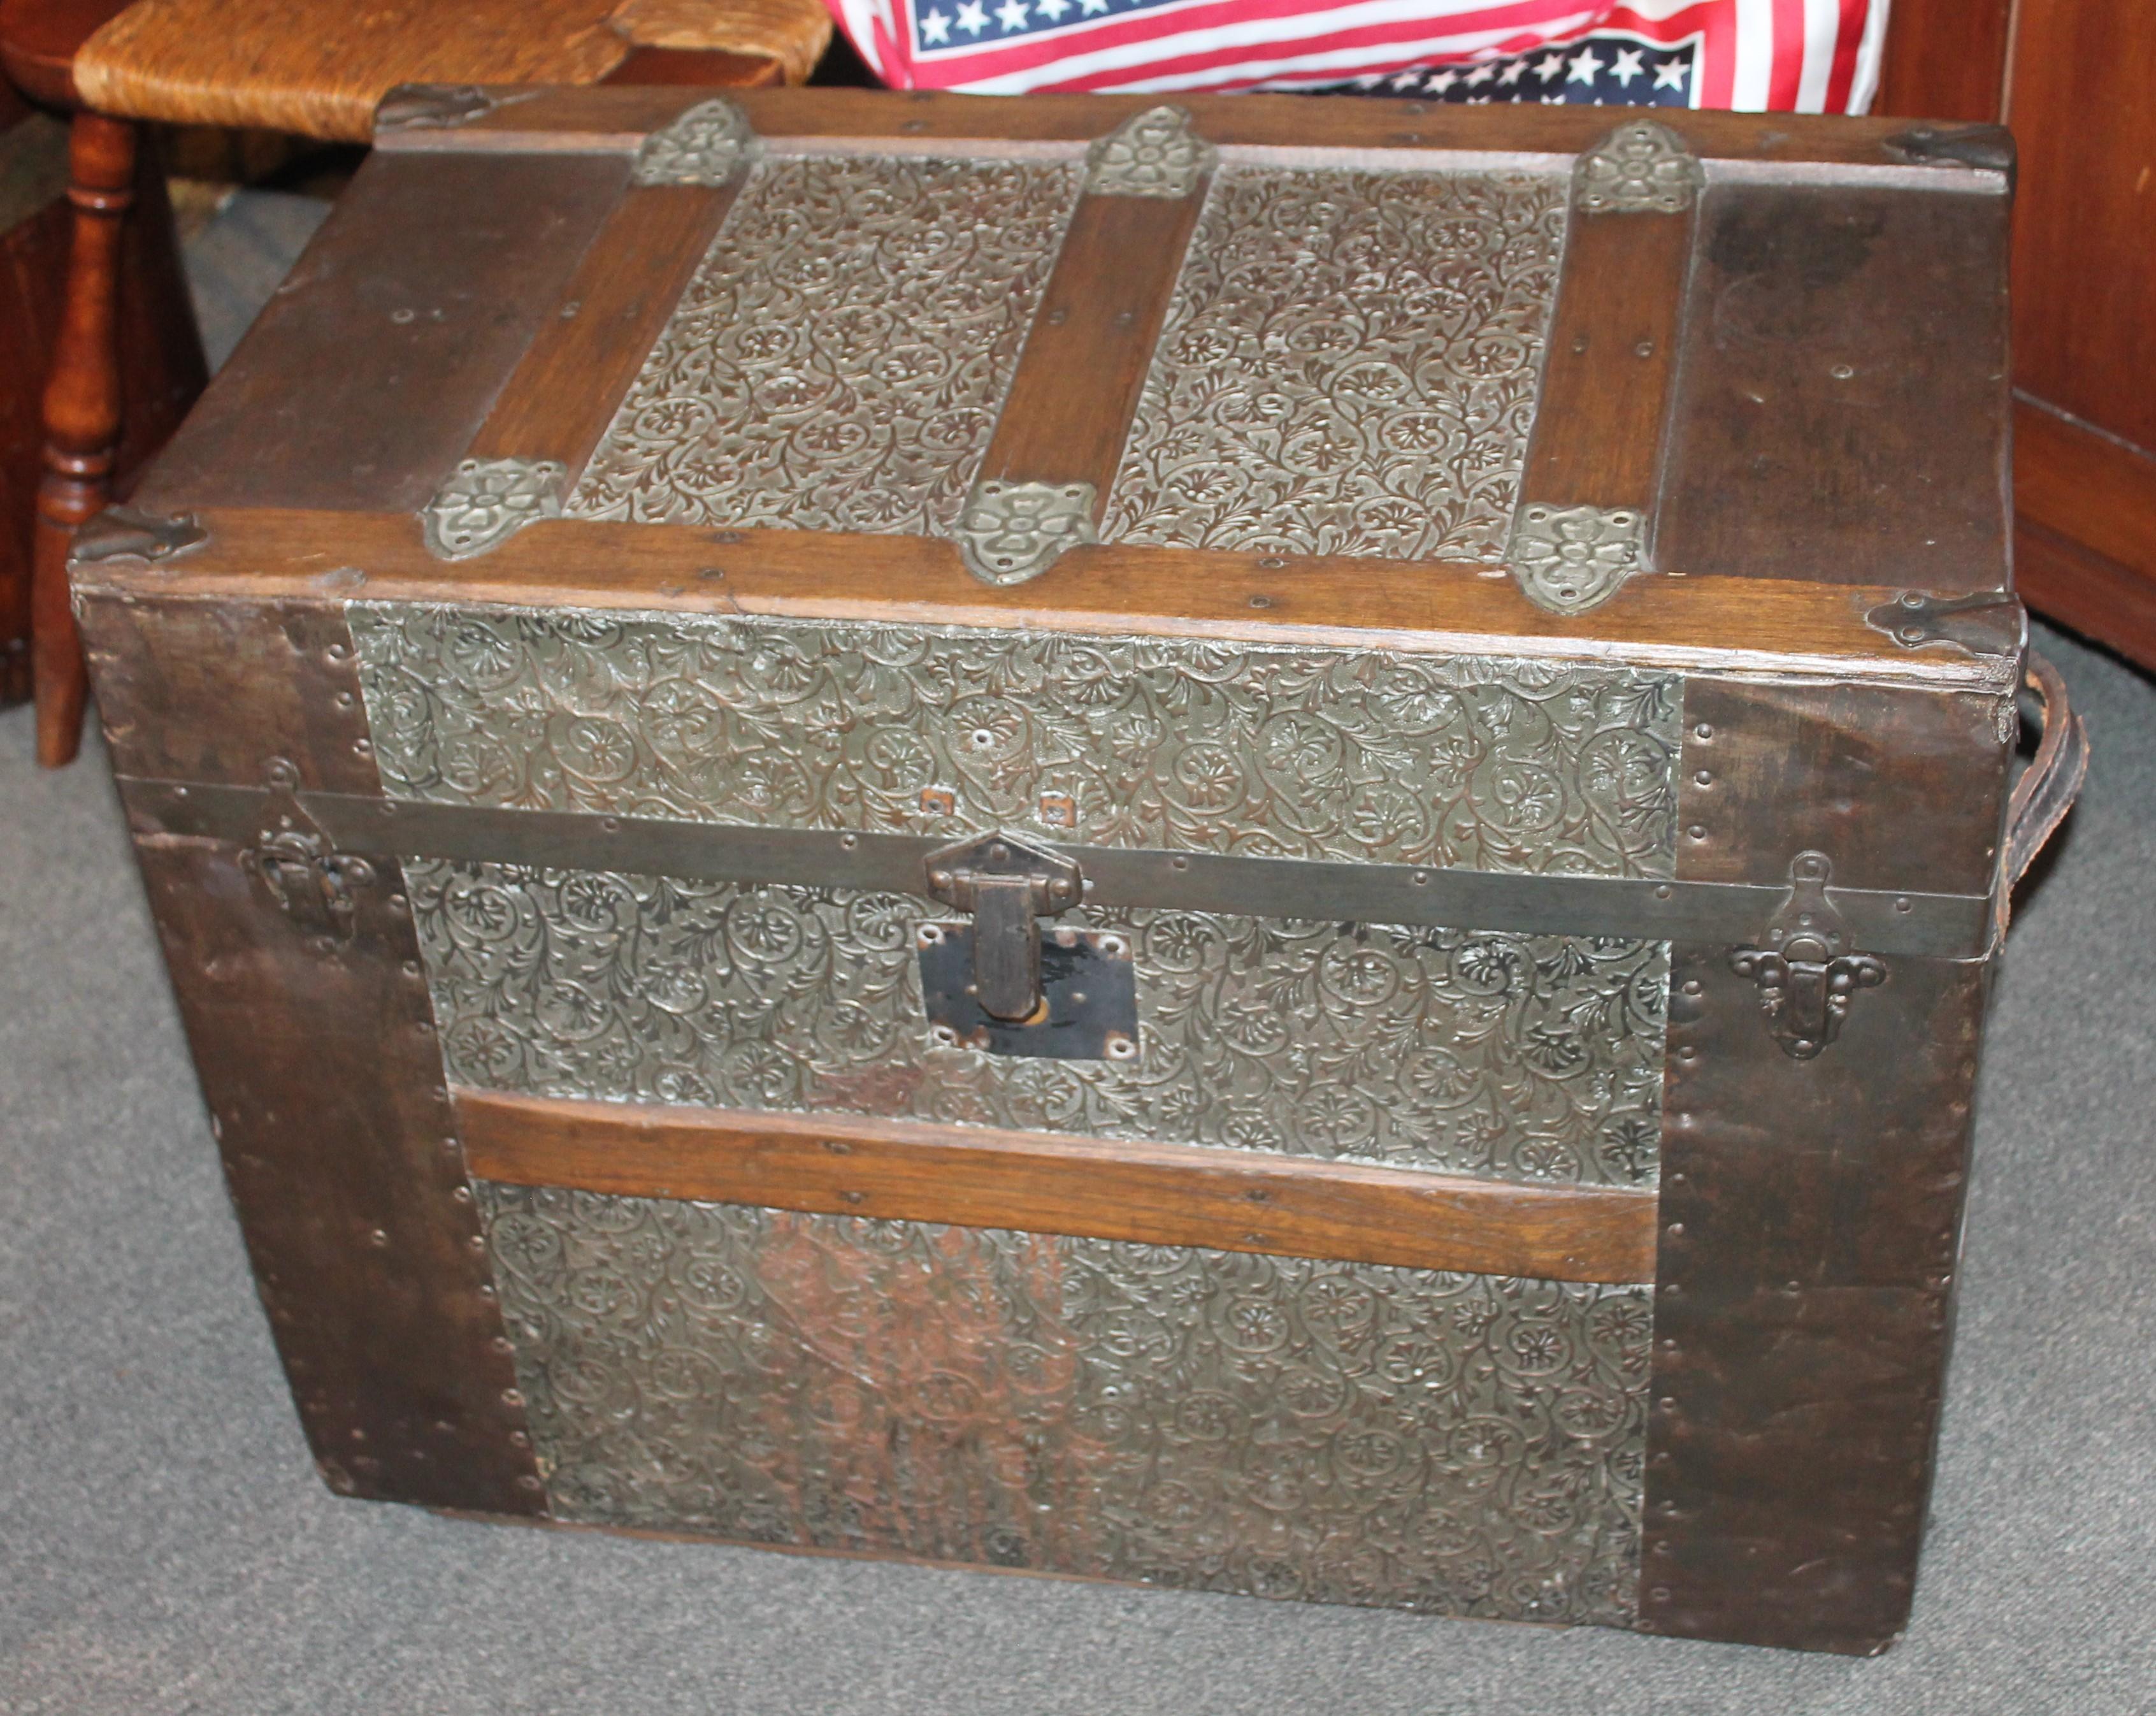 This 19th century wood trim trunk is in fine condition and has the original leather handles. The tin and metal trim is all in good condition. The inside liner is newly wall paper lining. This trunk has the original metal wheels.